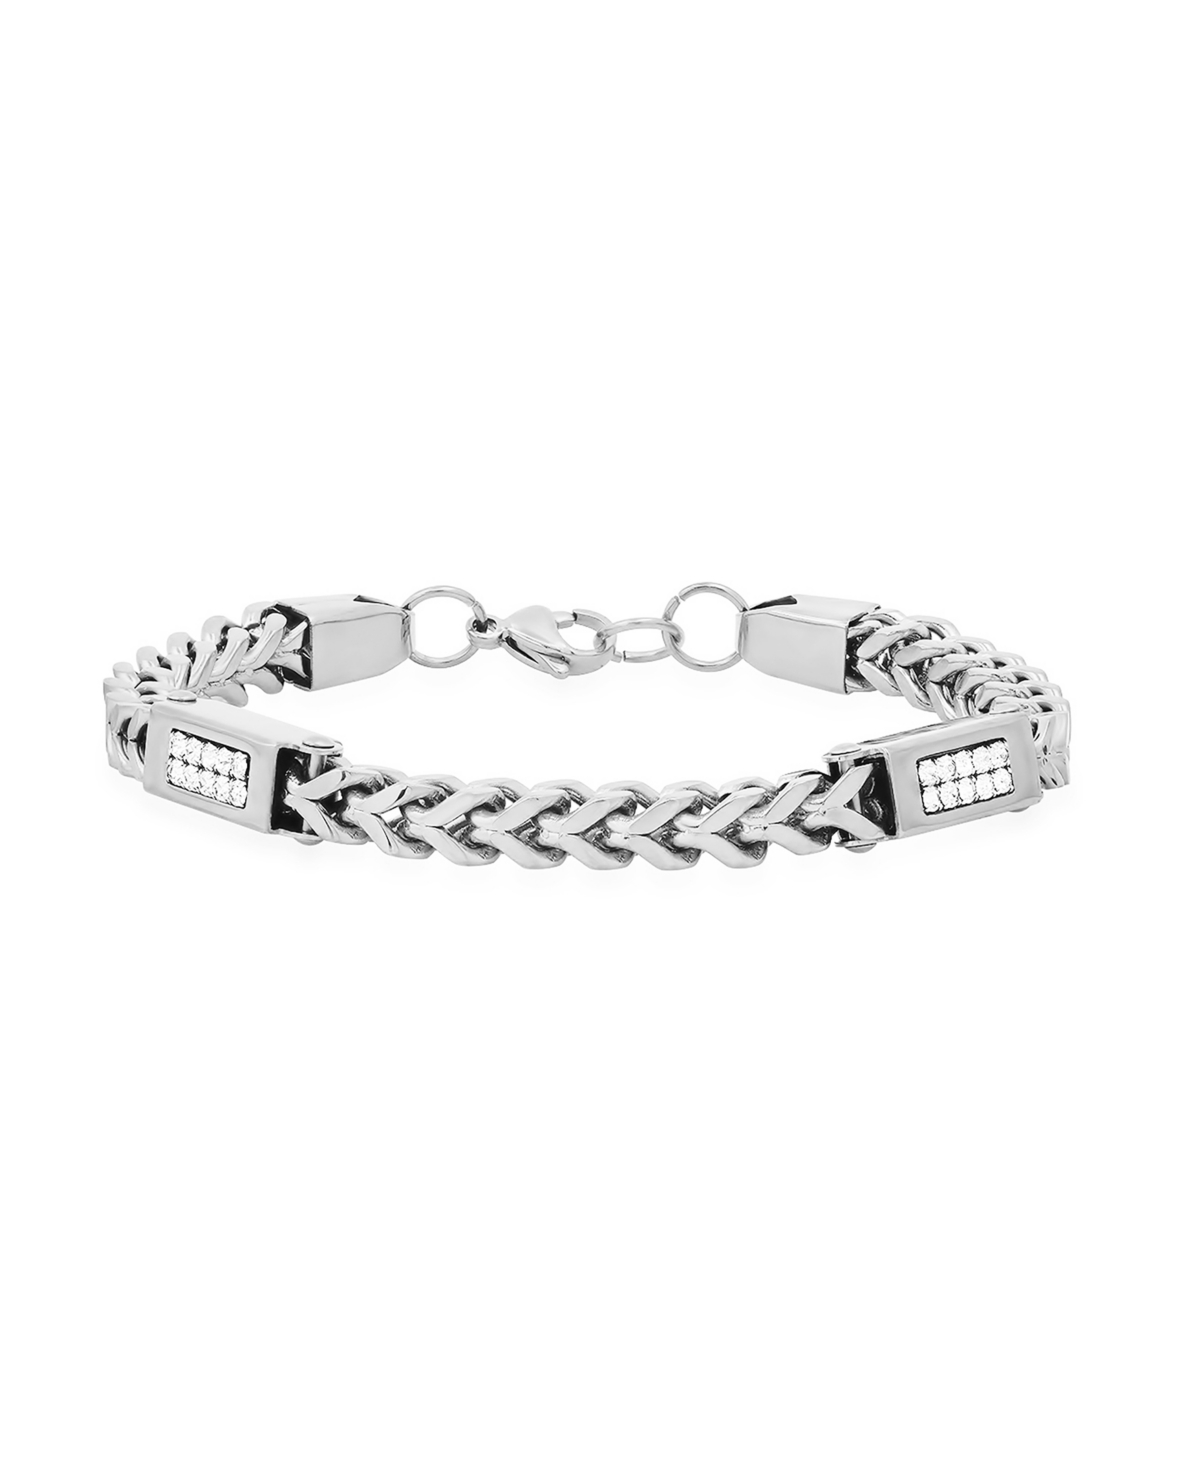 Men's Stainless Steel Wheat Chain and Simulated Diamonds Link Bracelet - Silver-tone